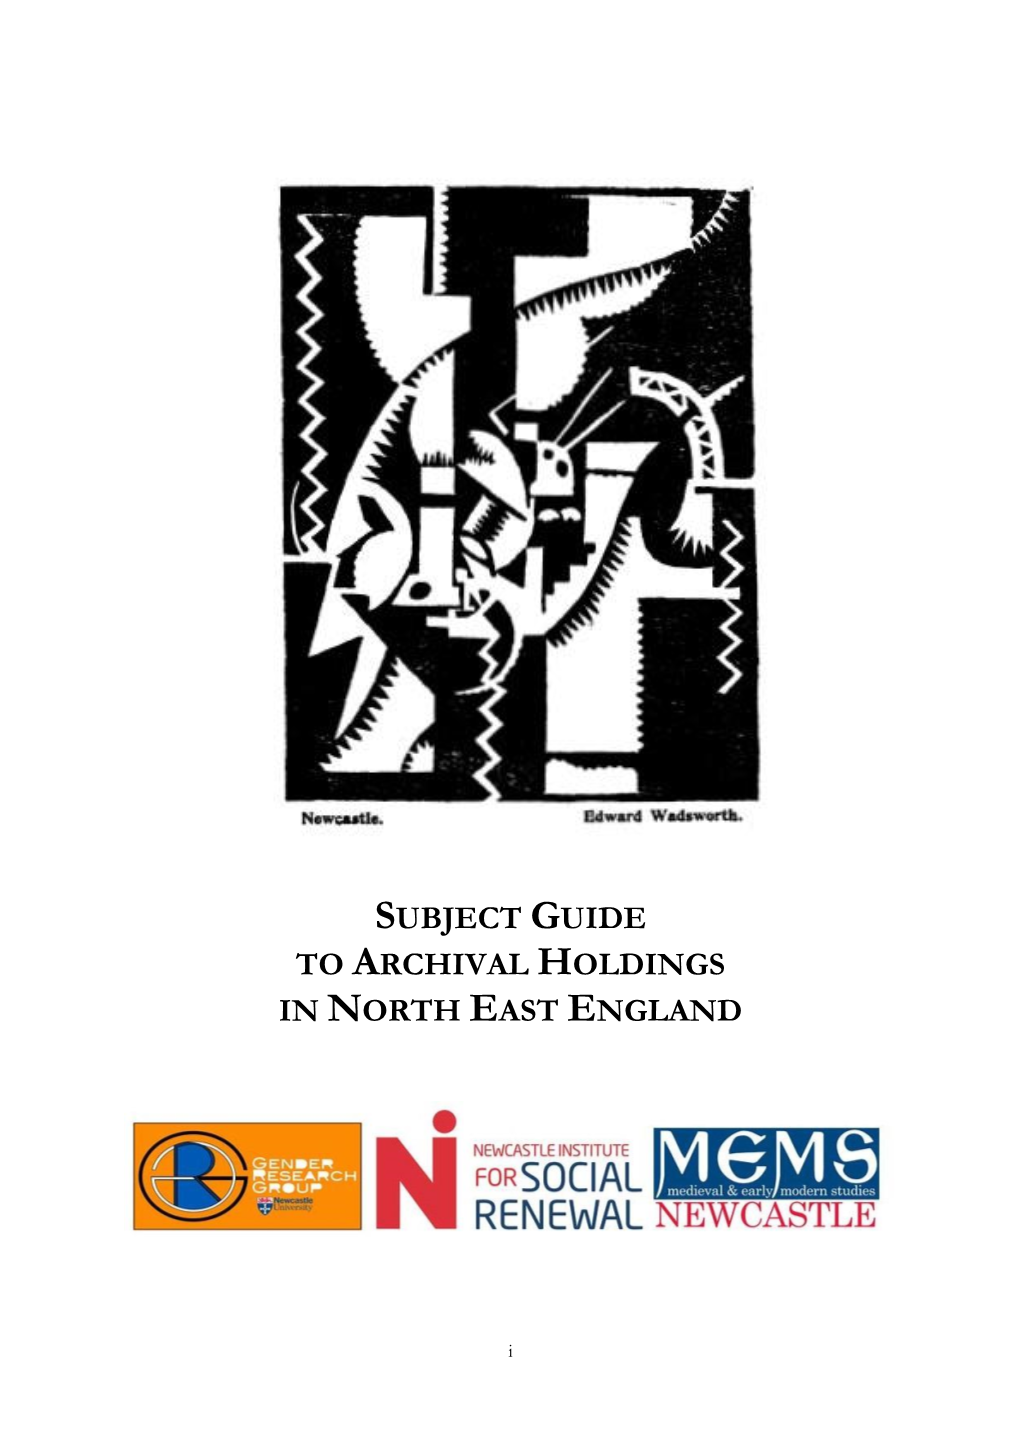 Subject Guide to Archival Holdings in North East England